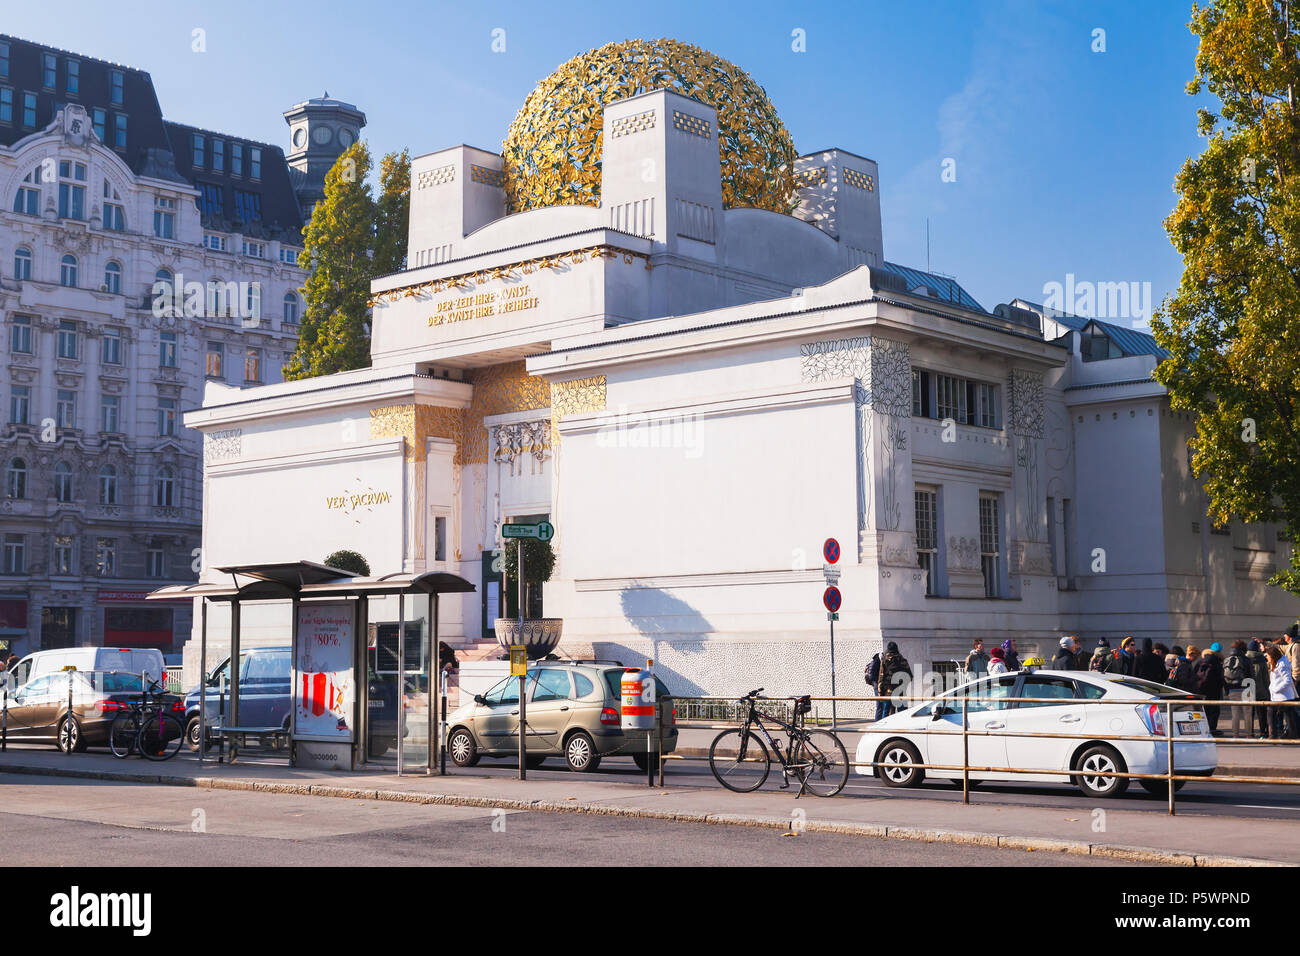 Vienna, Austria - November 4, 2015: The Vienna Secession building, built in 1897 by Joseph Maria Olbrich. Ordinary people walk nearby Stock Photo